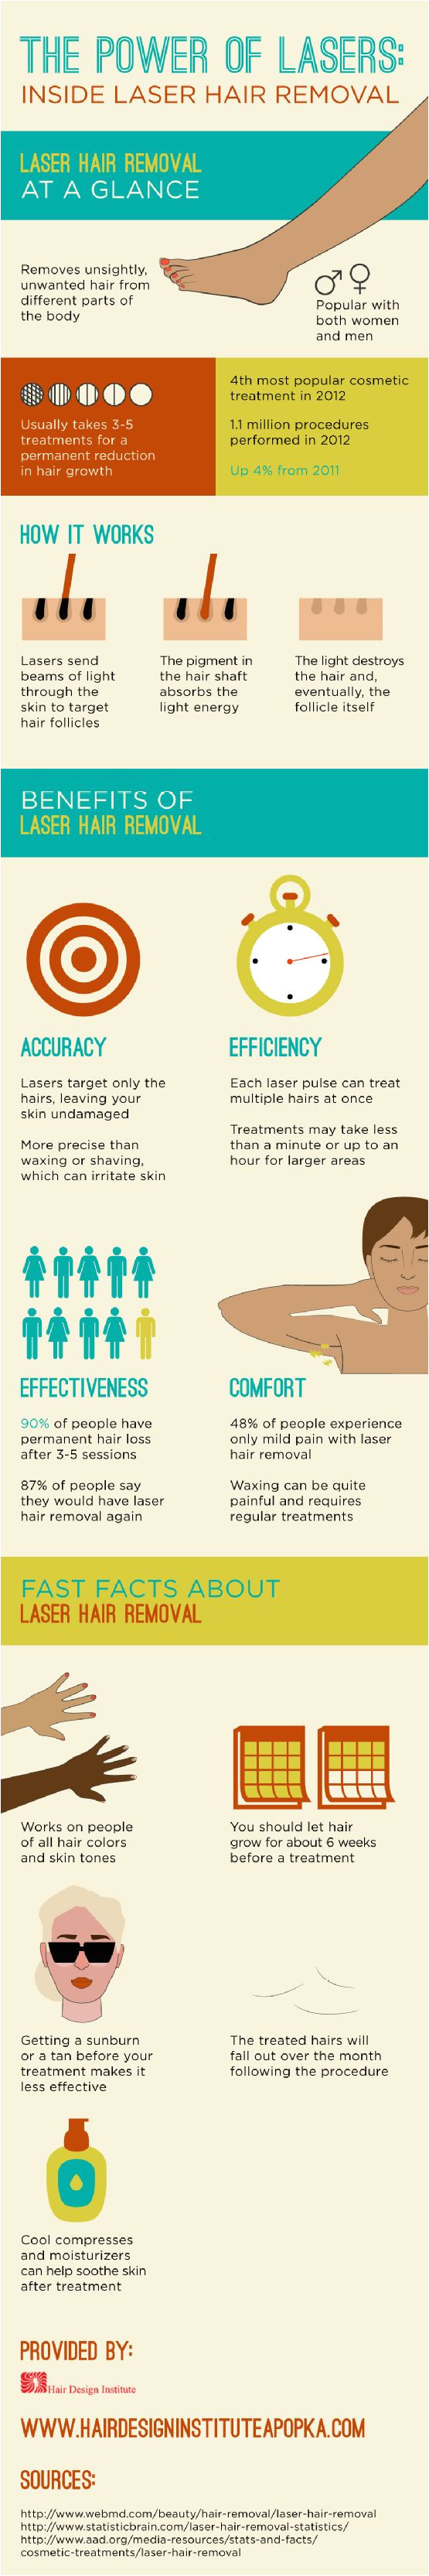 laser hair removal was the 4th most popular cosmetic treatment in 2012 that is because